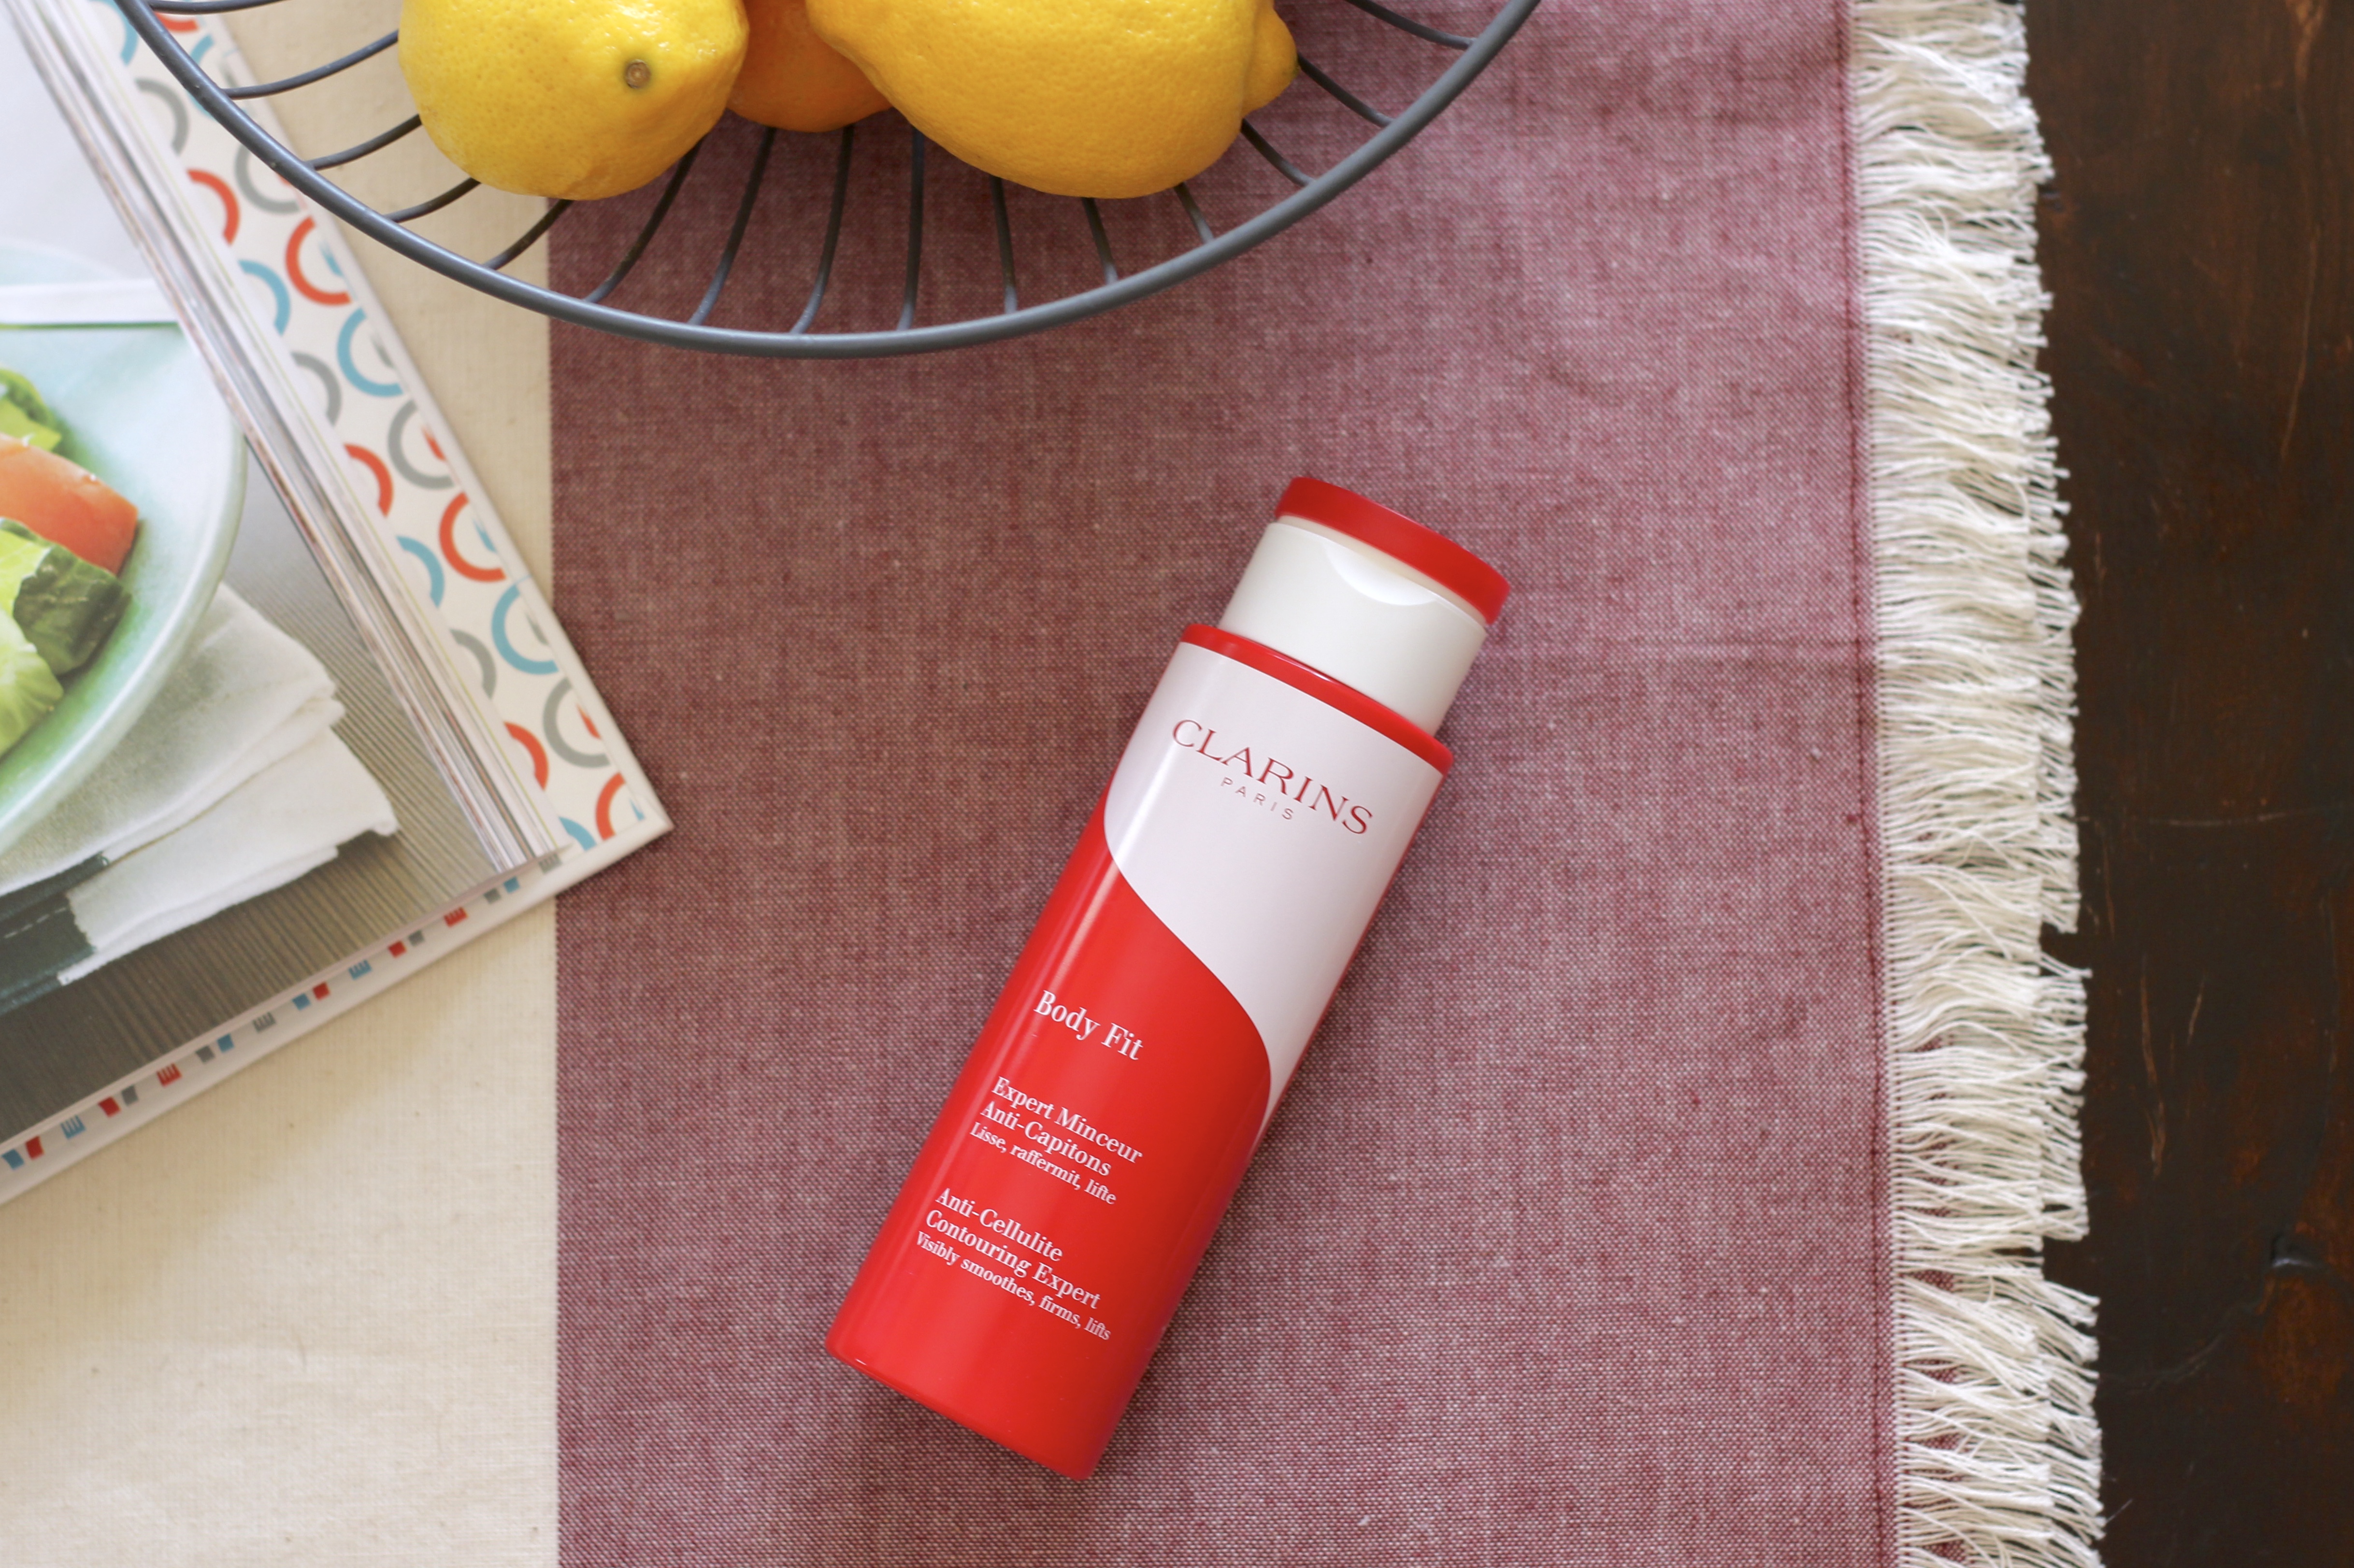 Smoother skin with less cellulite with Clarins Body Fit Gel